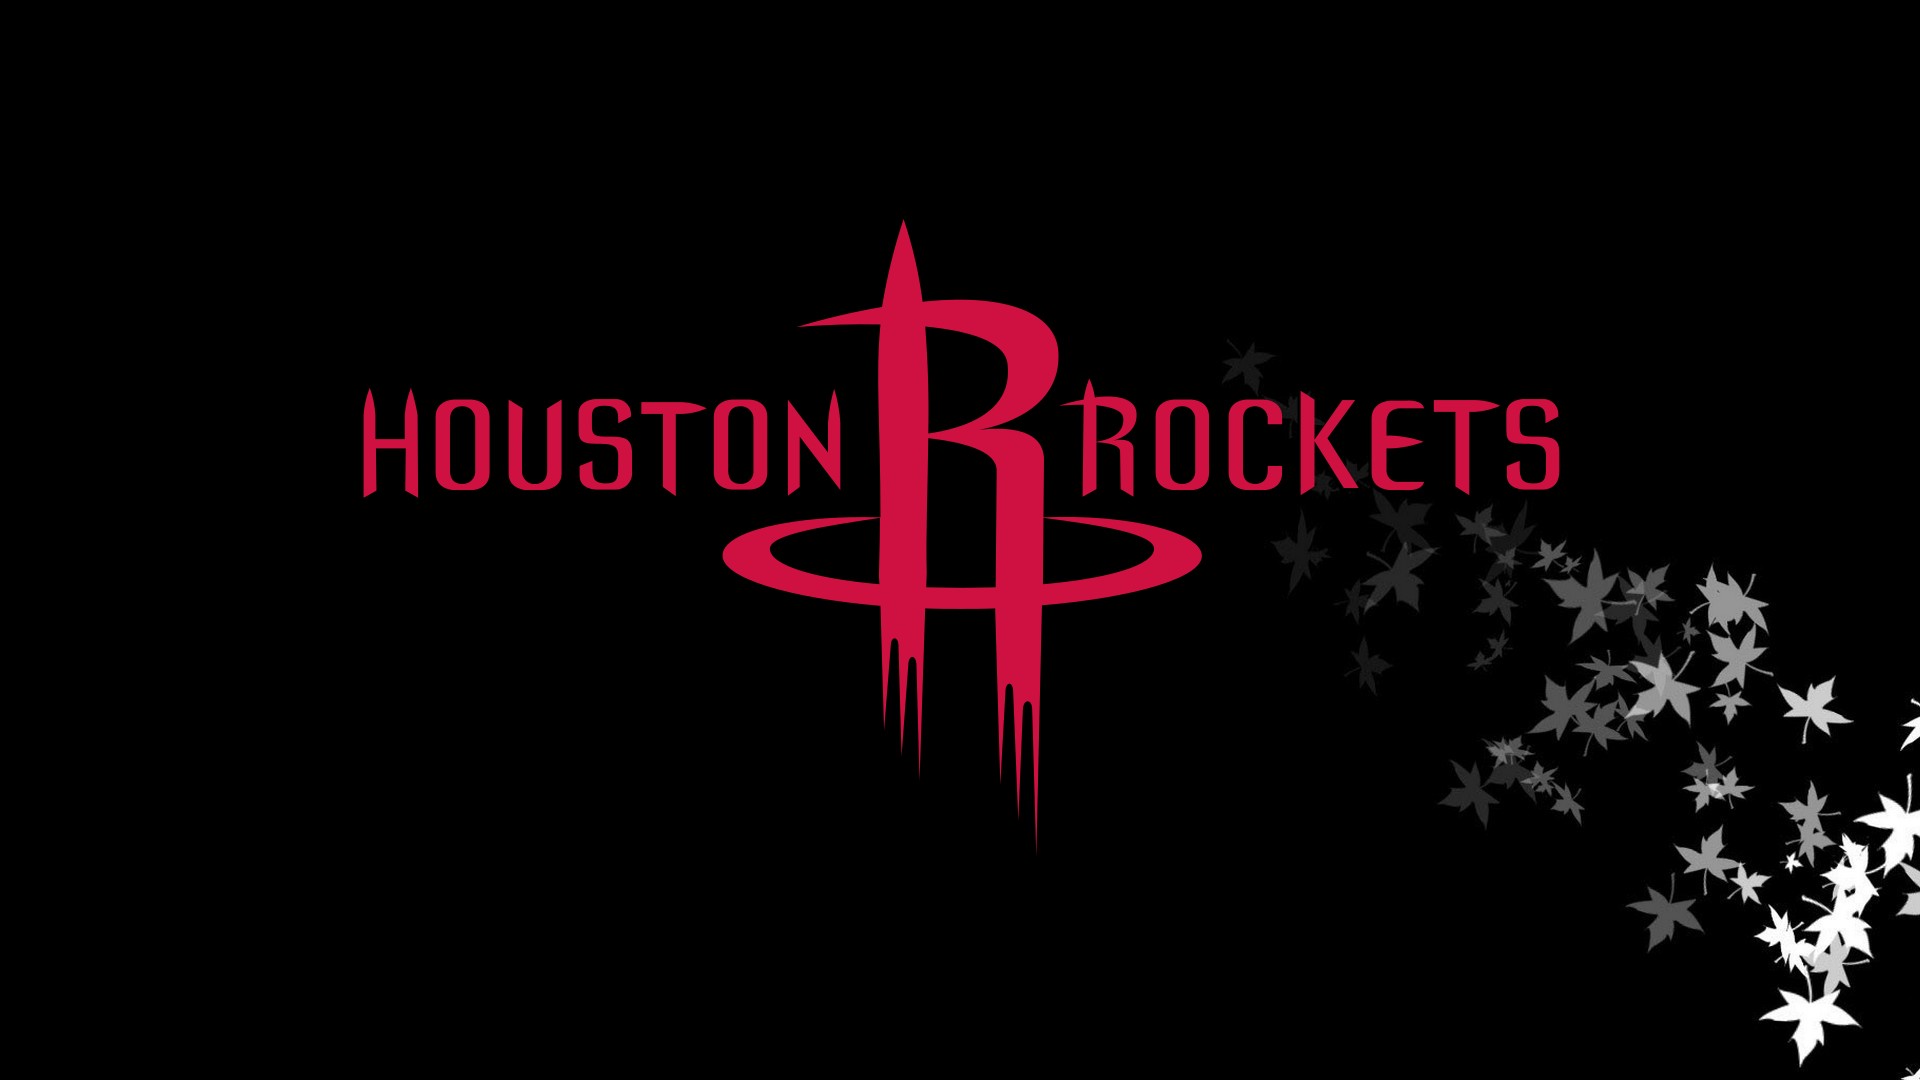 Rockets For Desktop Wallpaper with image dimensions 1920x1080 pixel. You can make this wallpaper for your Desktop Computer Backgrounds, Windows or Mac Screensavers, iPhone Lock screen, Tablet or Android and another Mobile Phone device